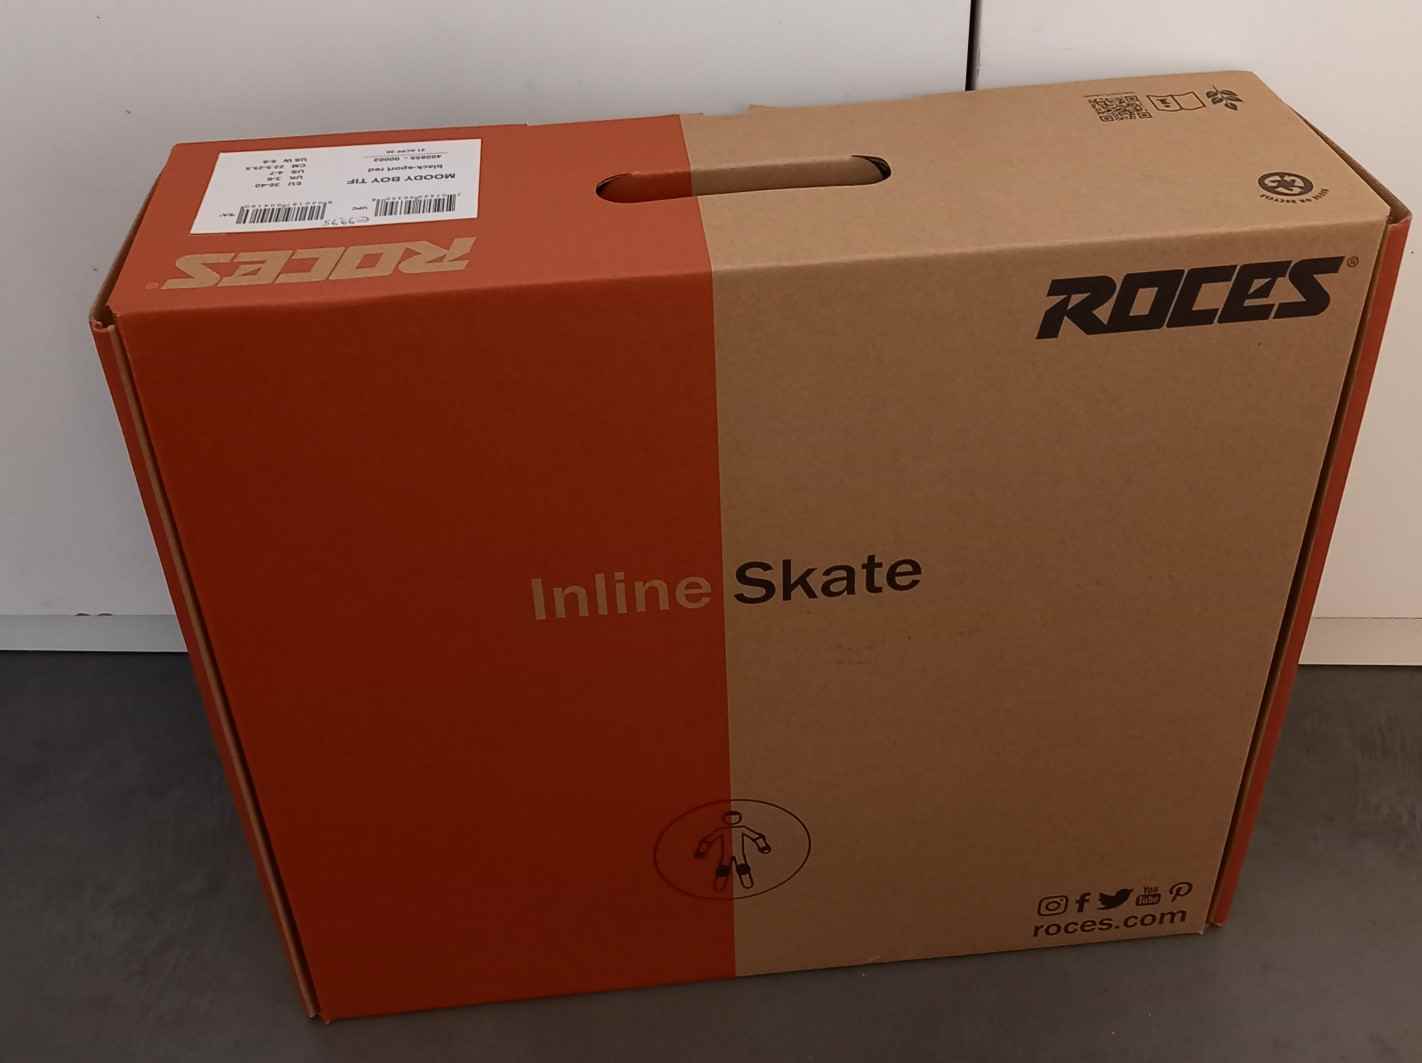 Inline skate box without packaging.